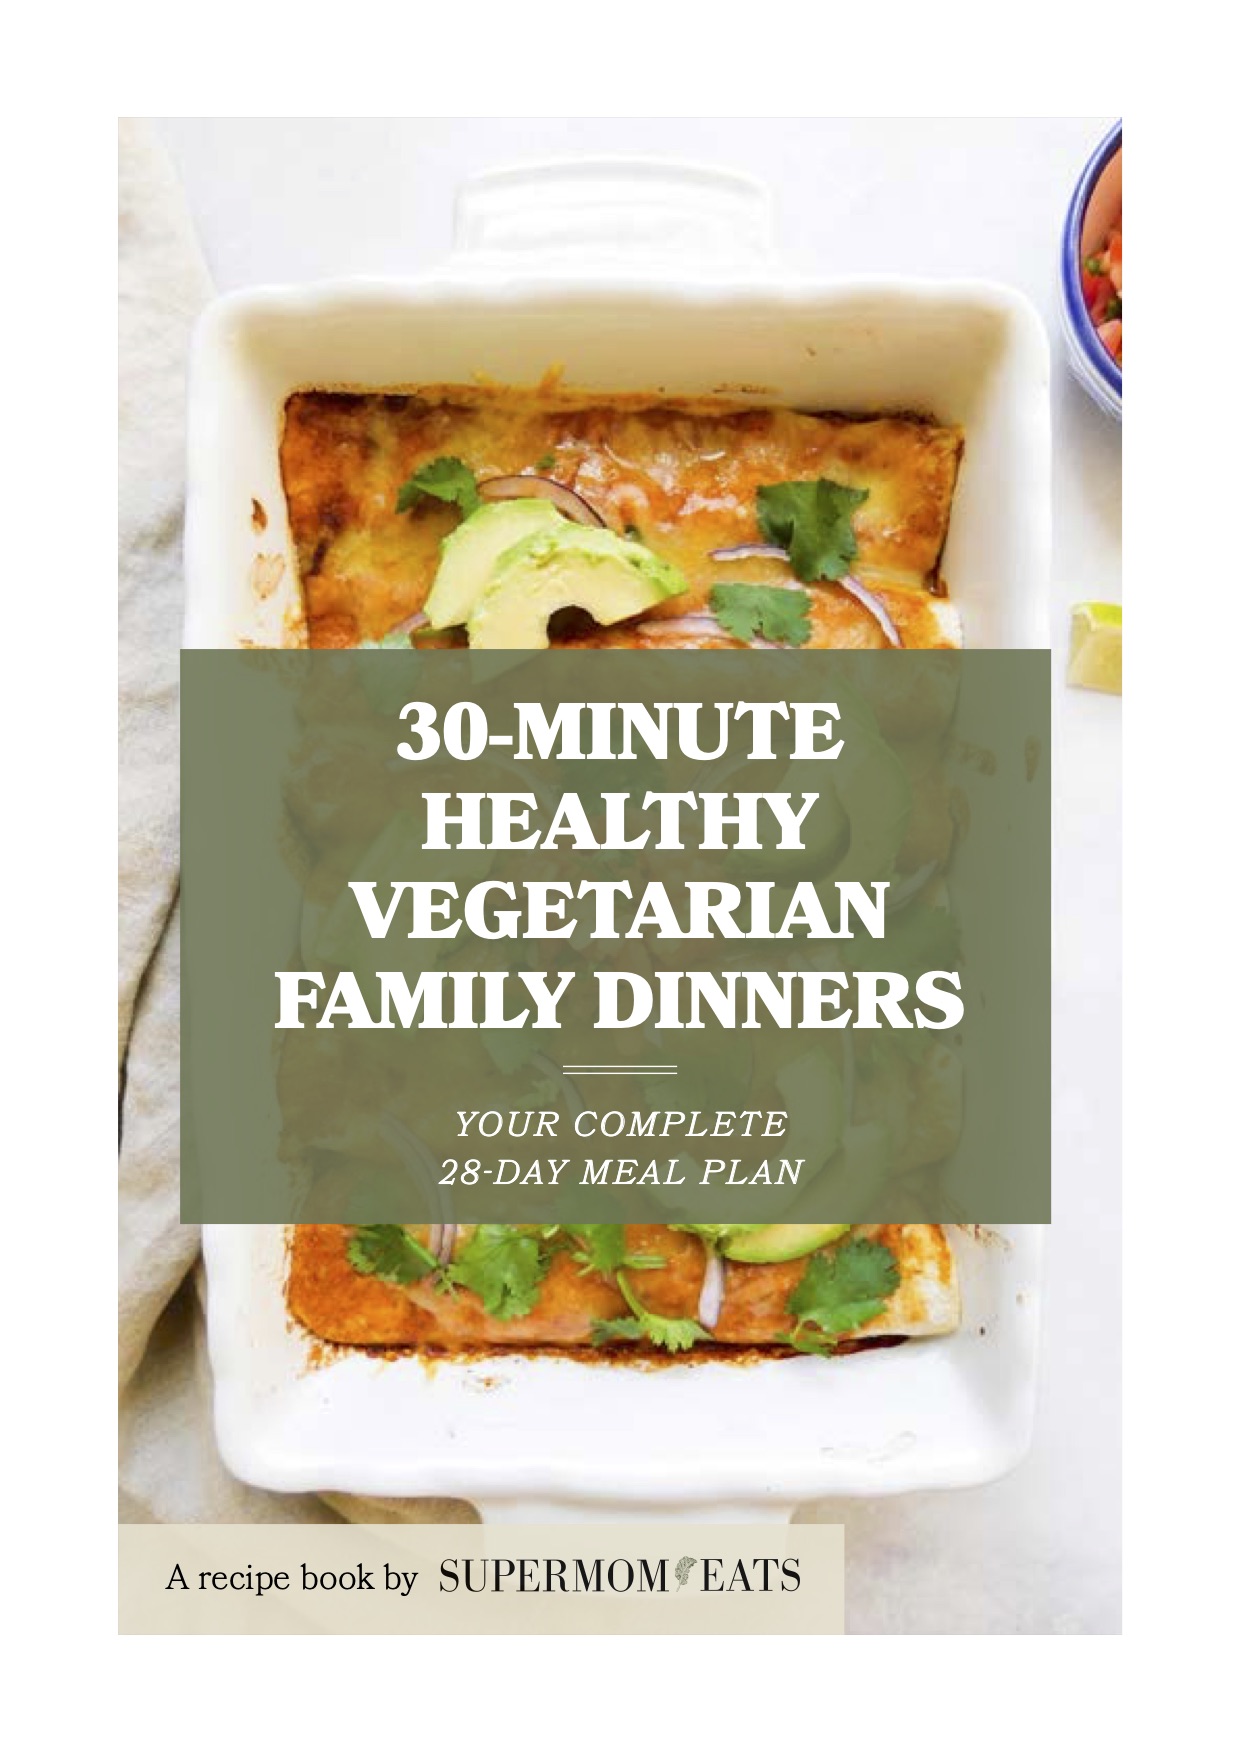 The front cover of the meal plan.